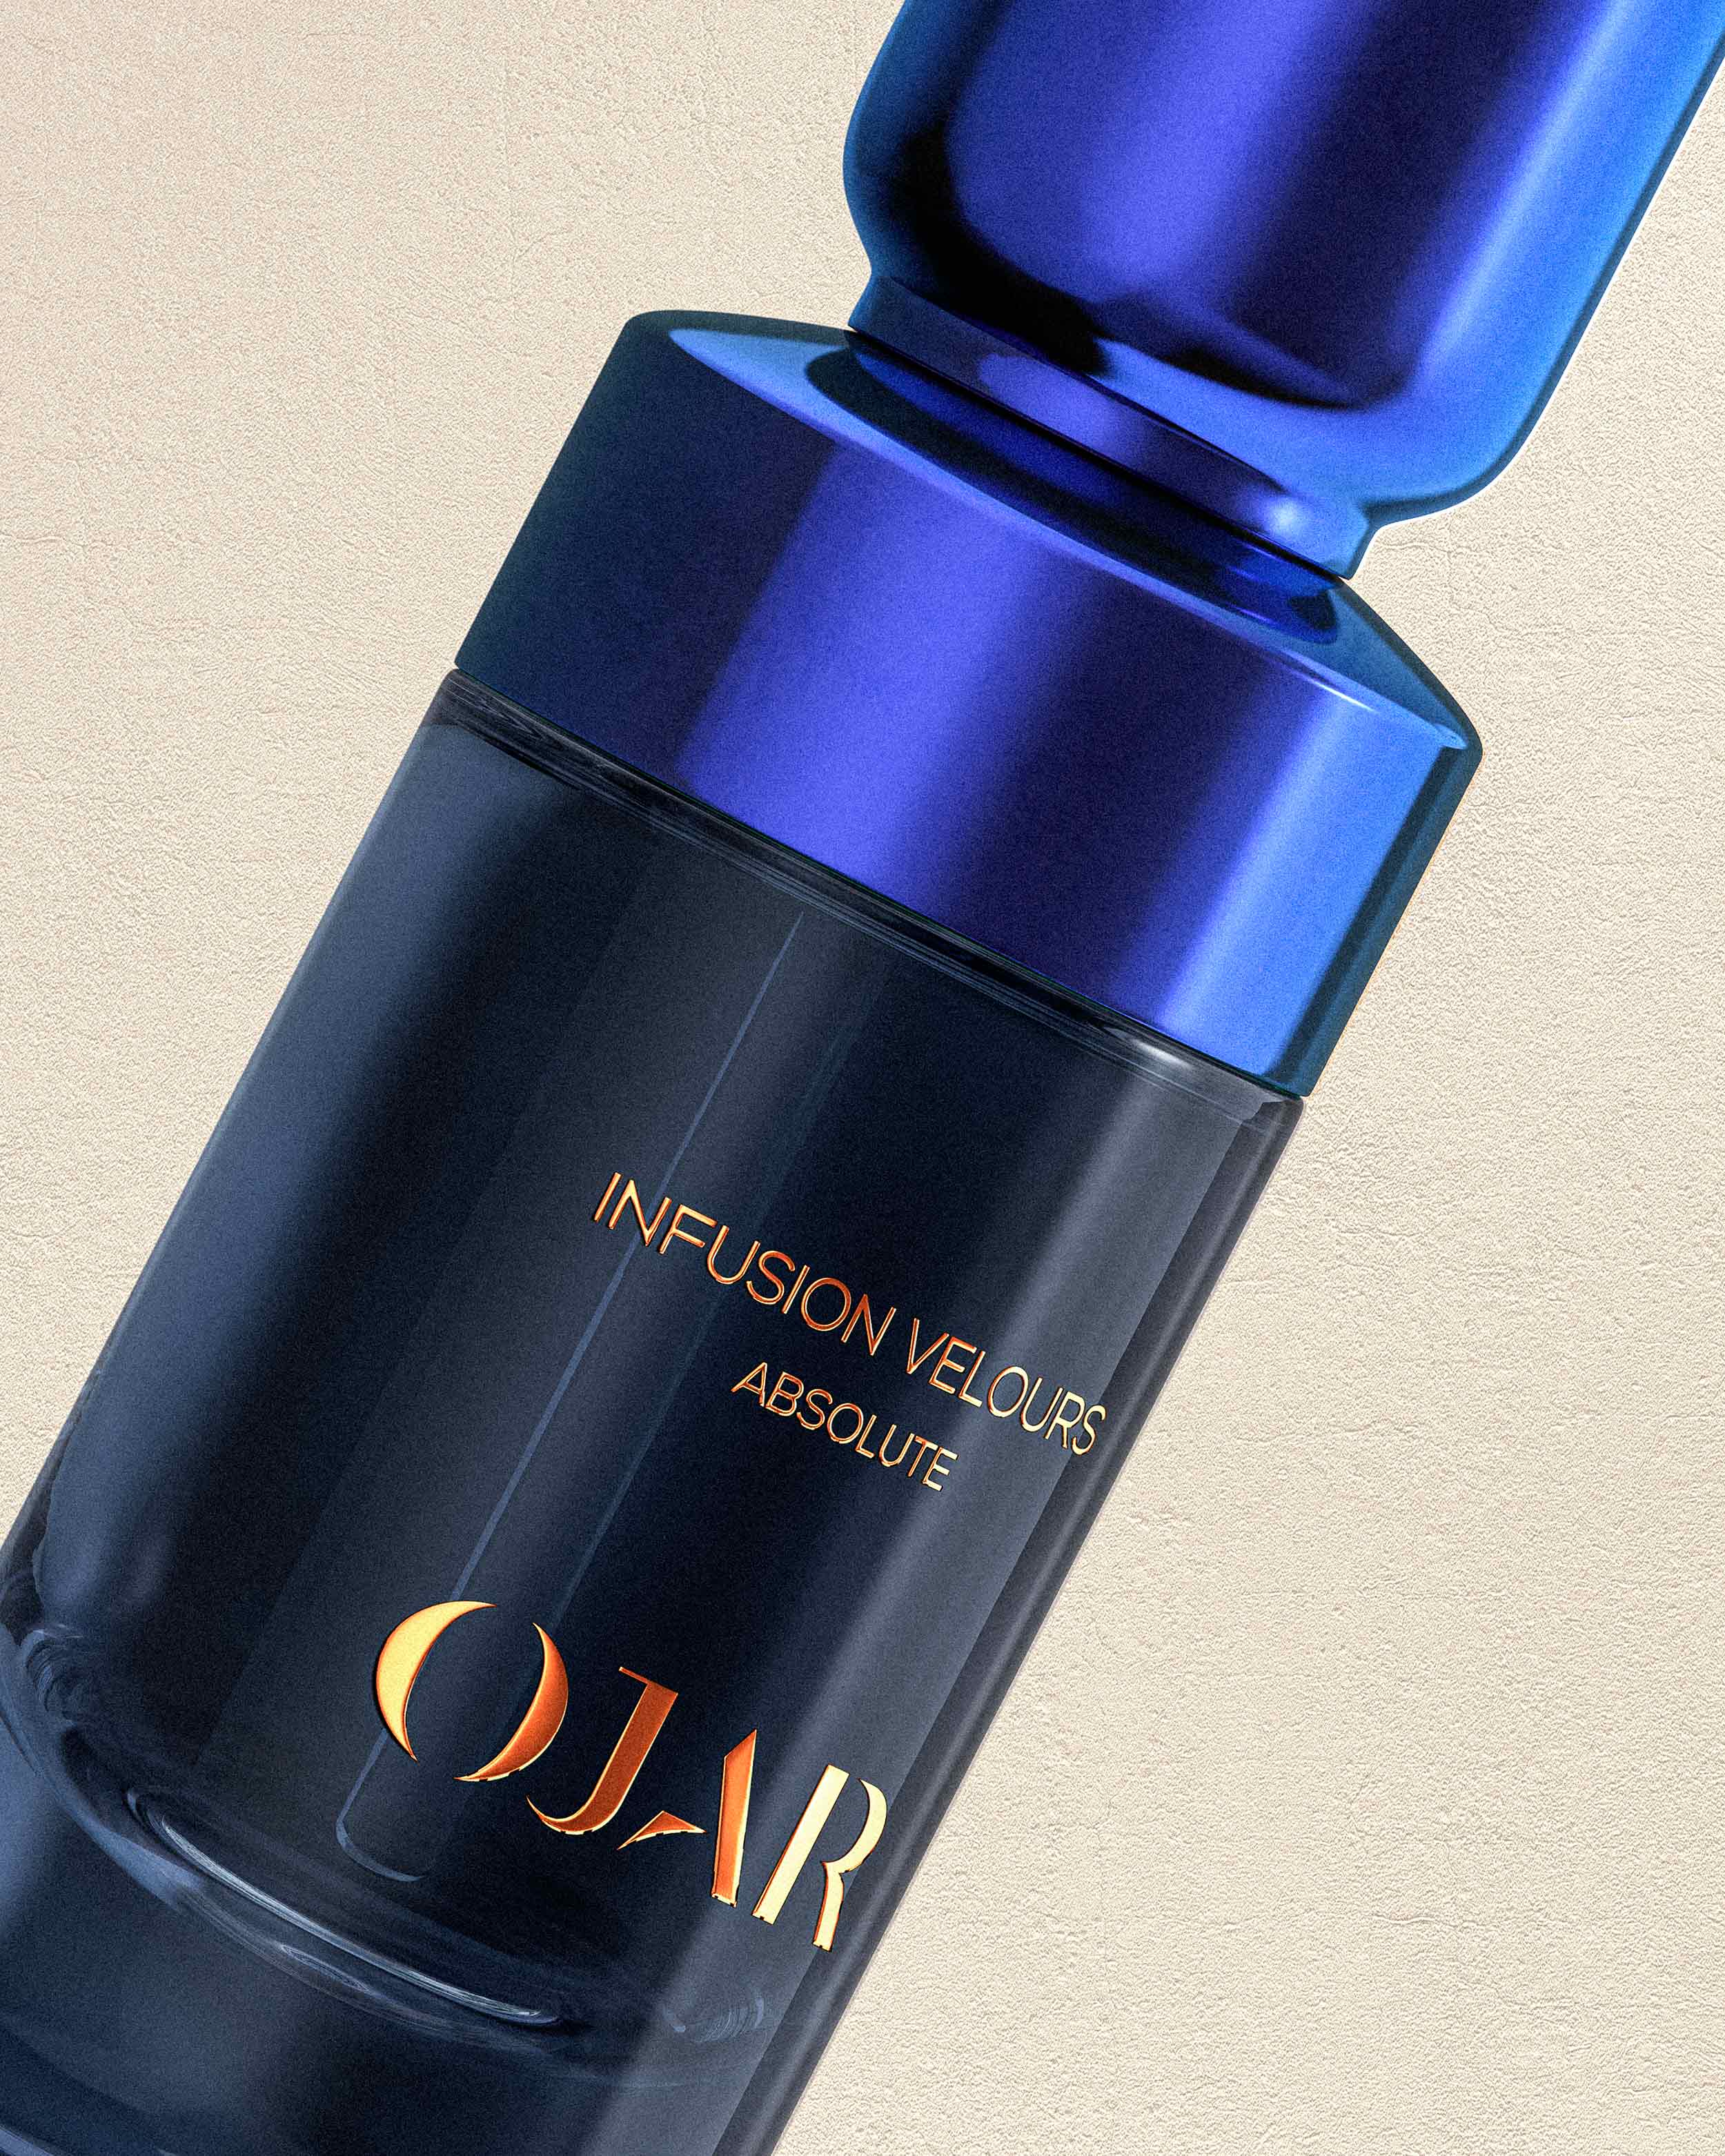 OJAR Absolute Infusion Velours Perfume Close Up